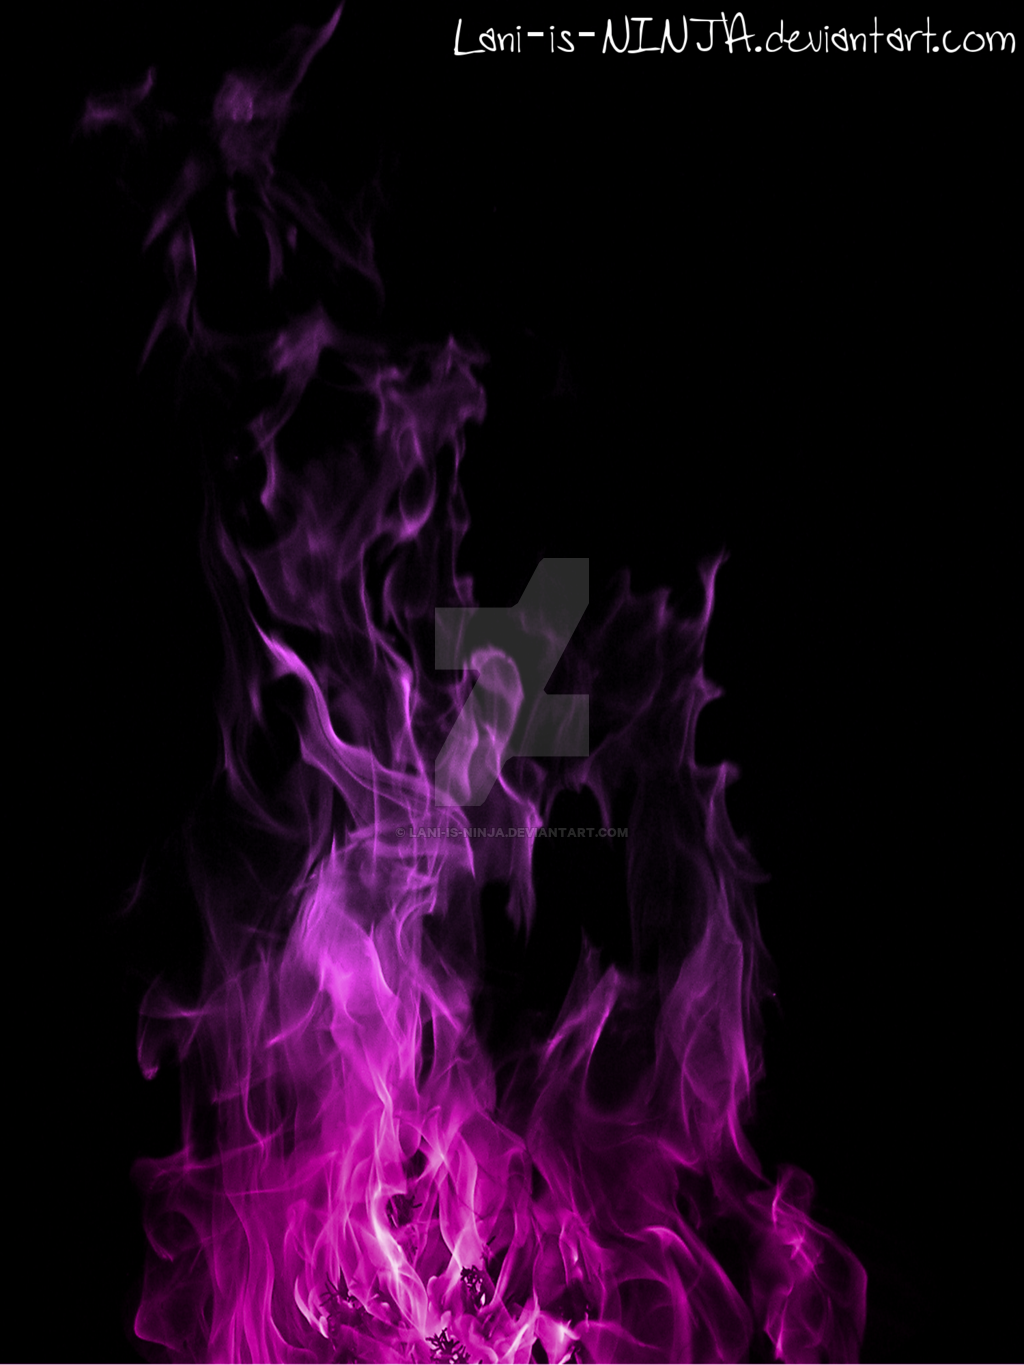 Purple flames with black background by Lani is NINJA on